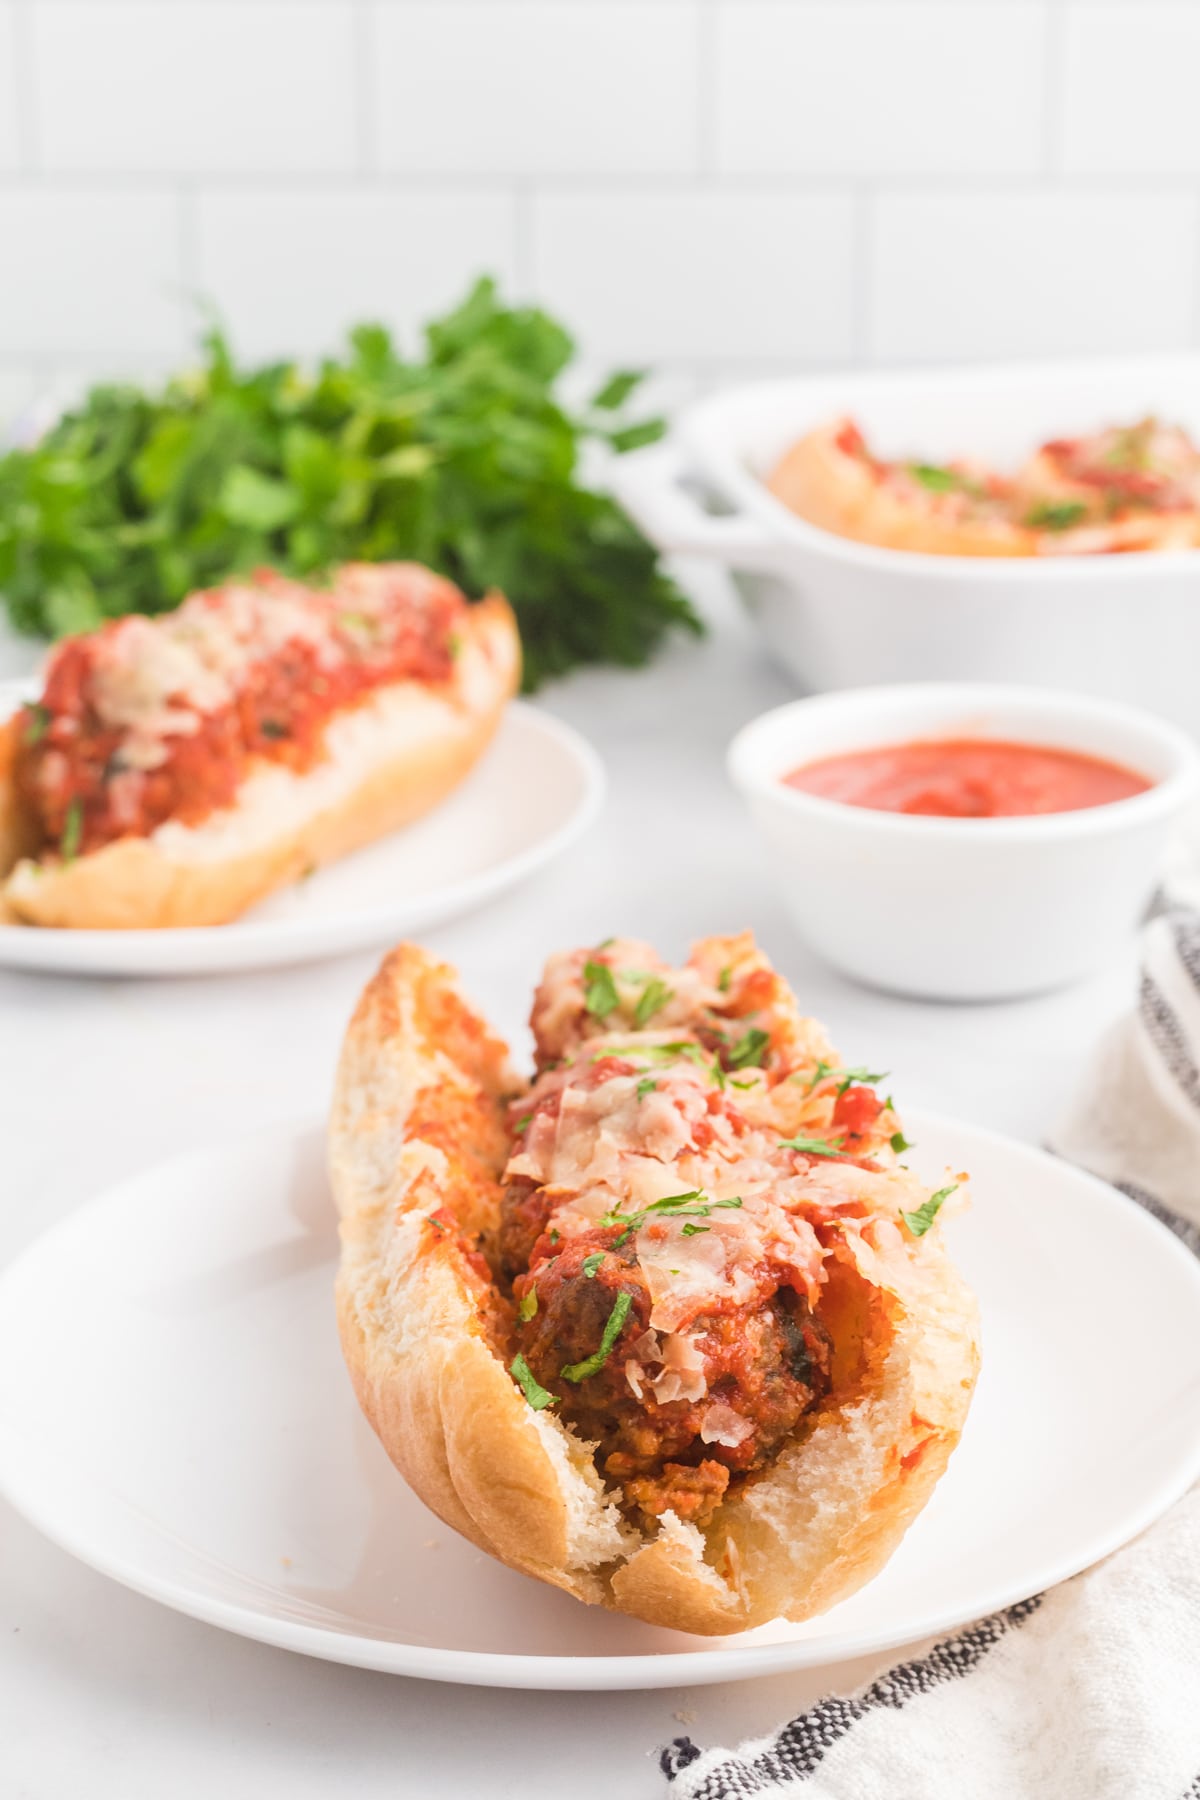 Overhead view of meatball subs on plates